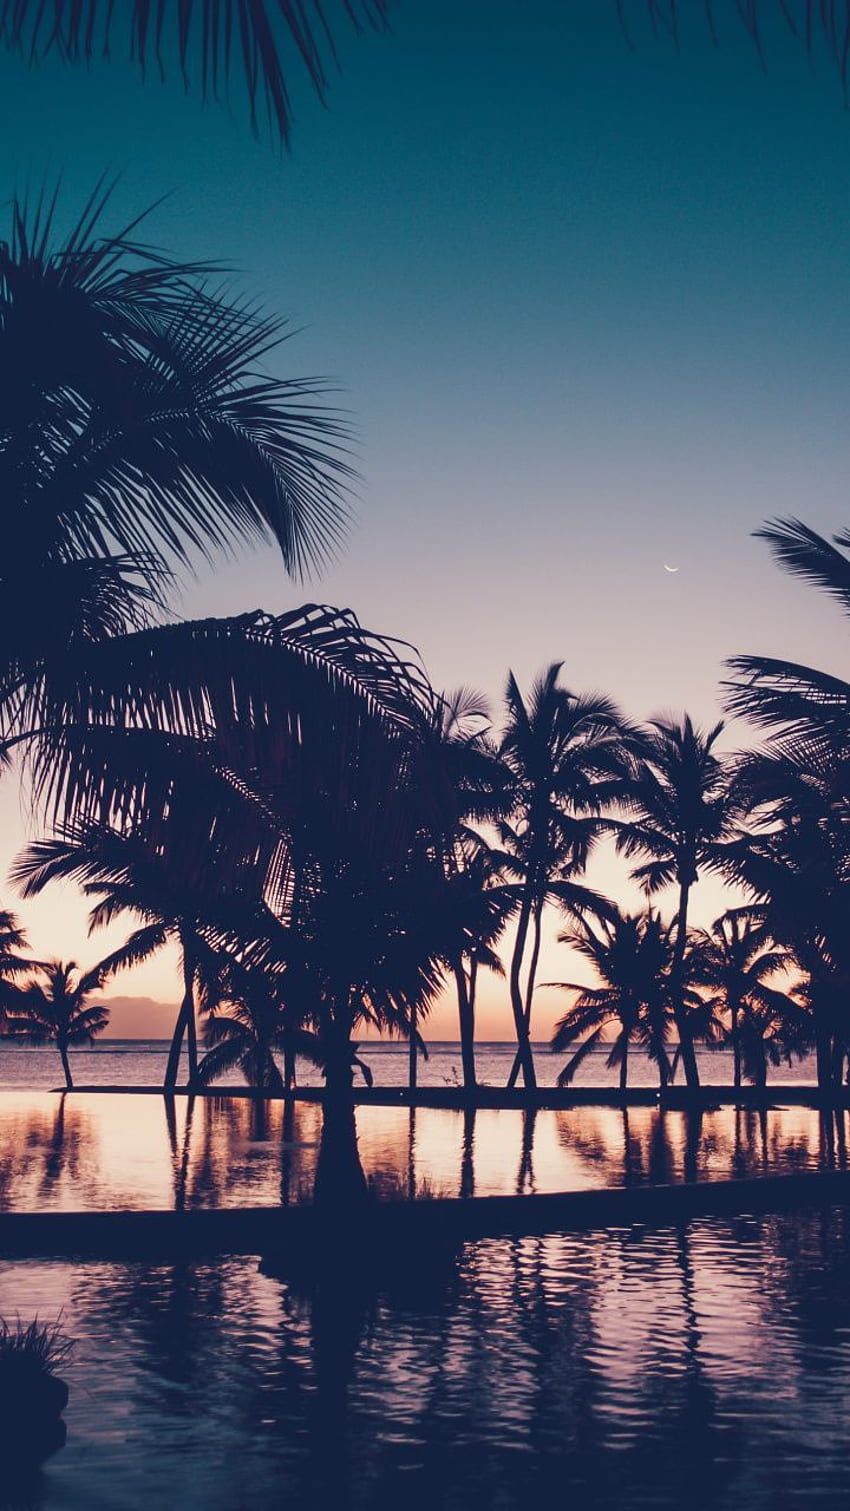 A view of palm trees and water at sunset - Palm tree